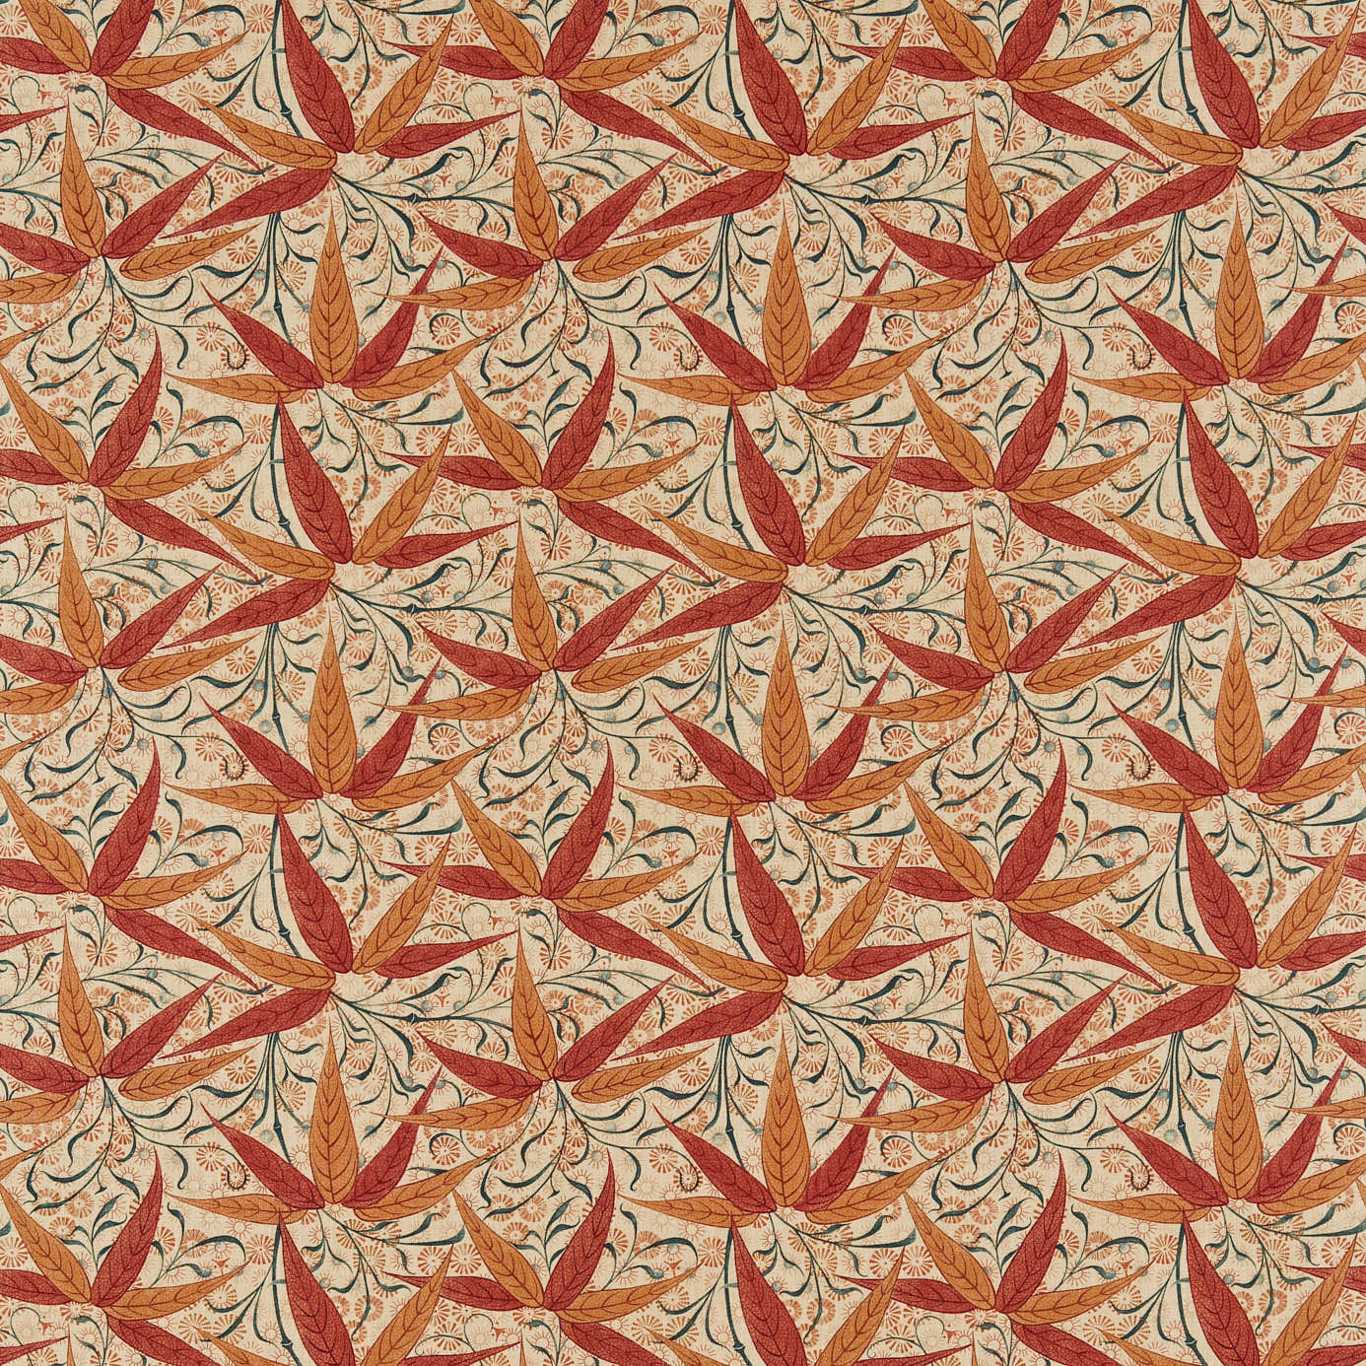 Bamboo Fabric by Morris & Co. - DCMF226720 - Russet/Siena